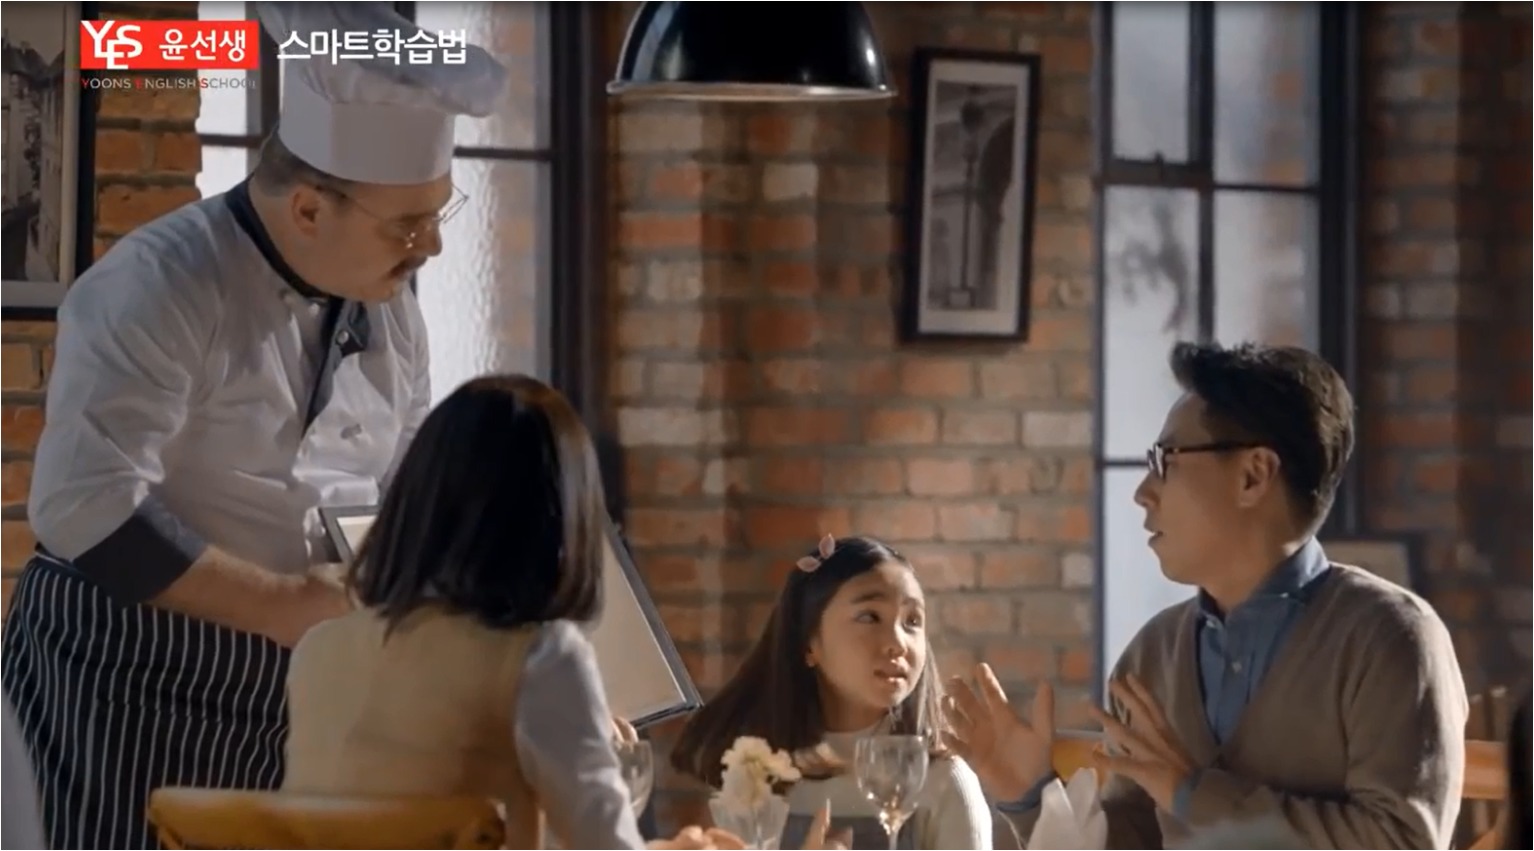 Still of Dean Dawson (far left) as the Chef in a commercial for Yoon's English.